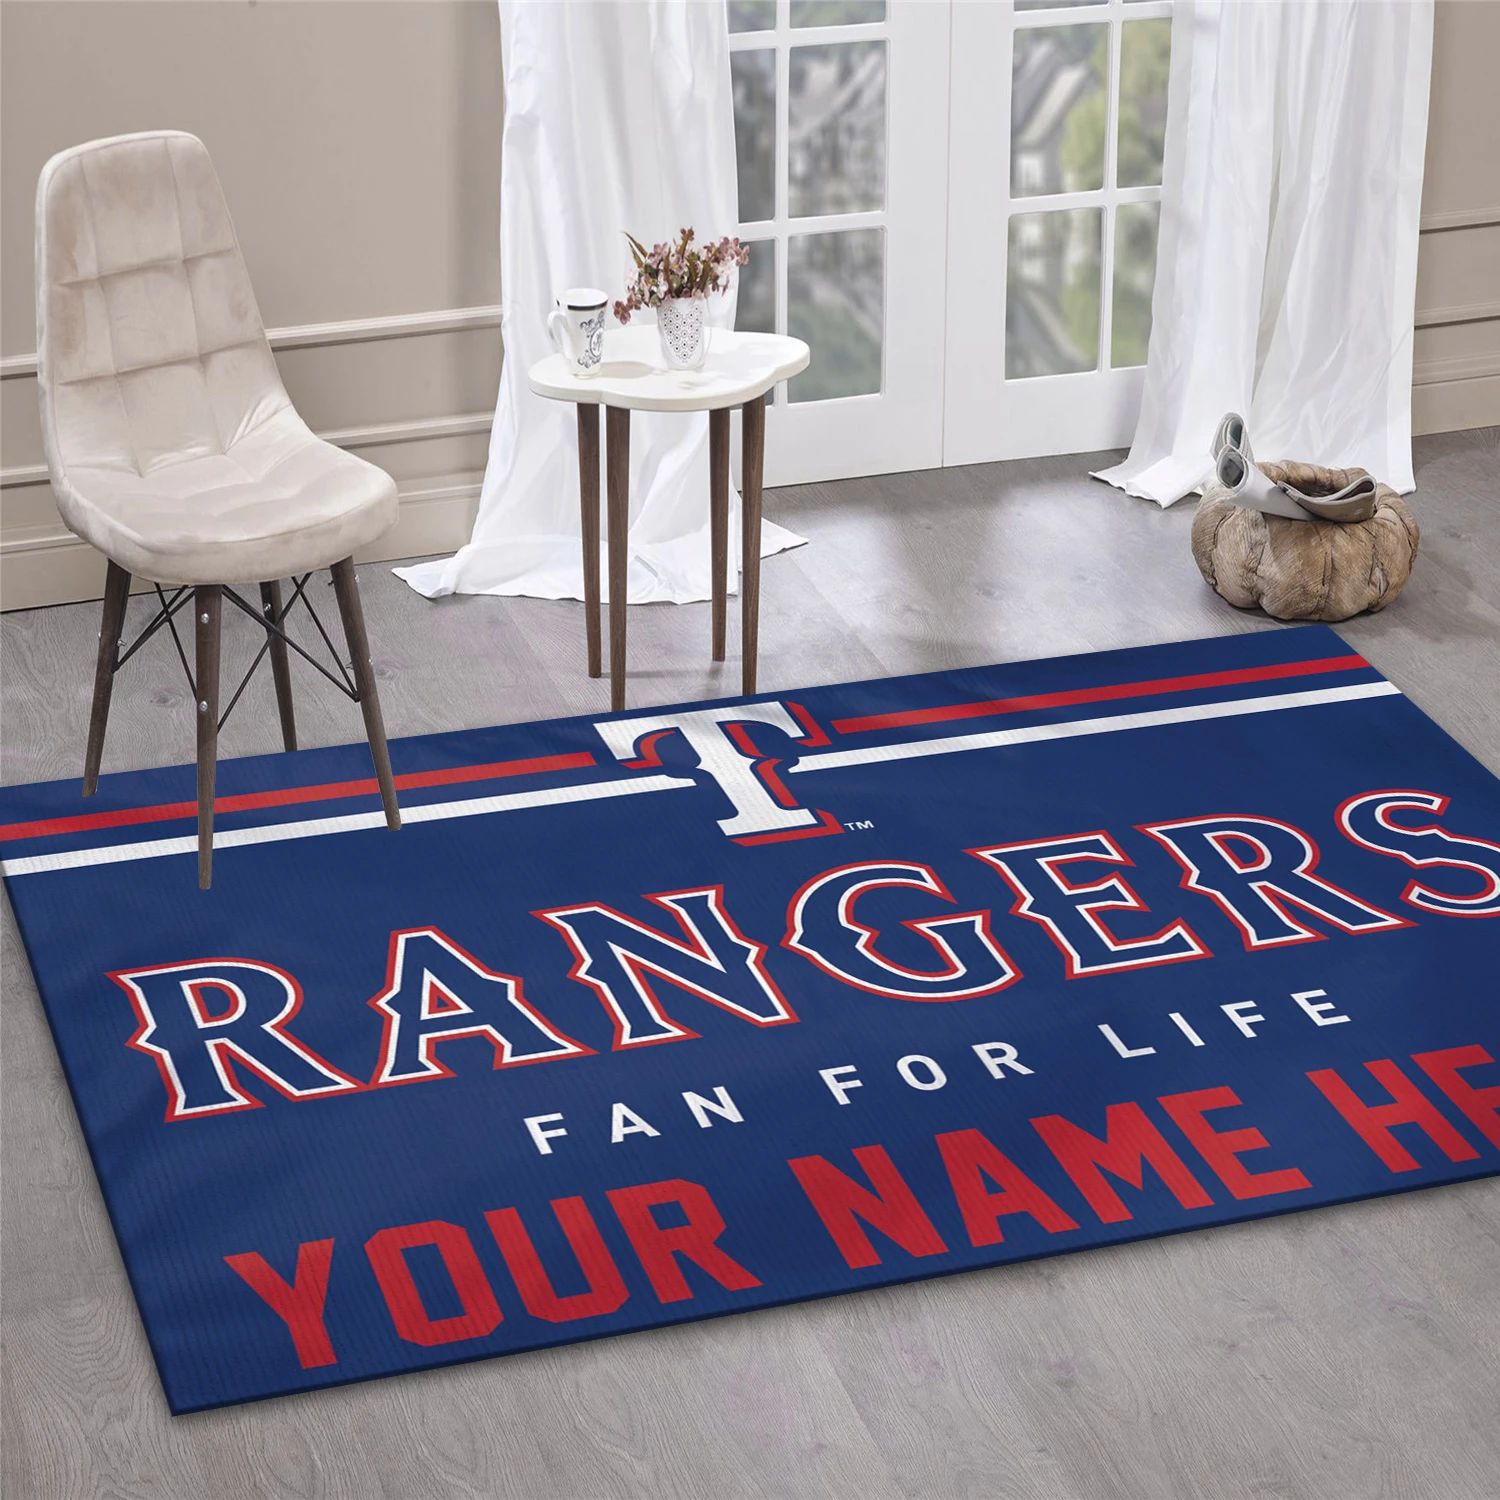 Texas Rangers Personalized MLB Area Rug For Christmas, Living Room Rug - Room Decor - Indoor Outdoor Rugs